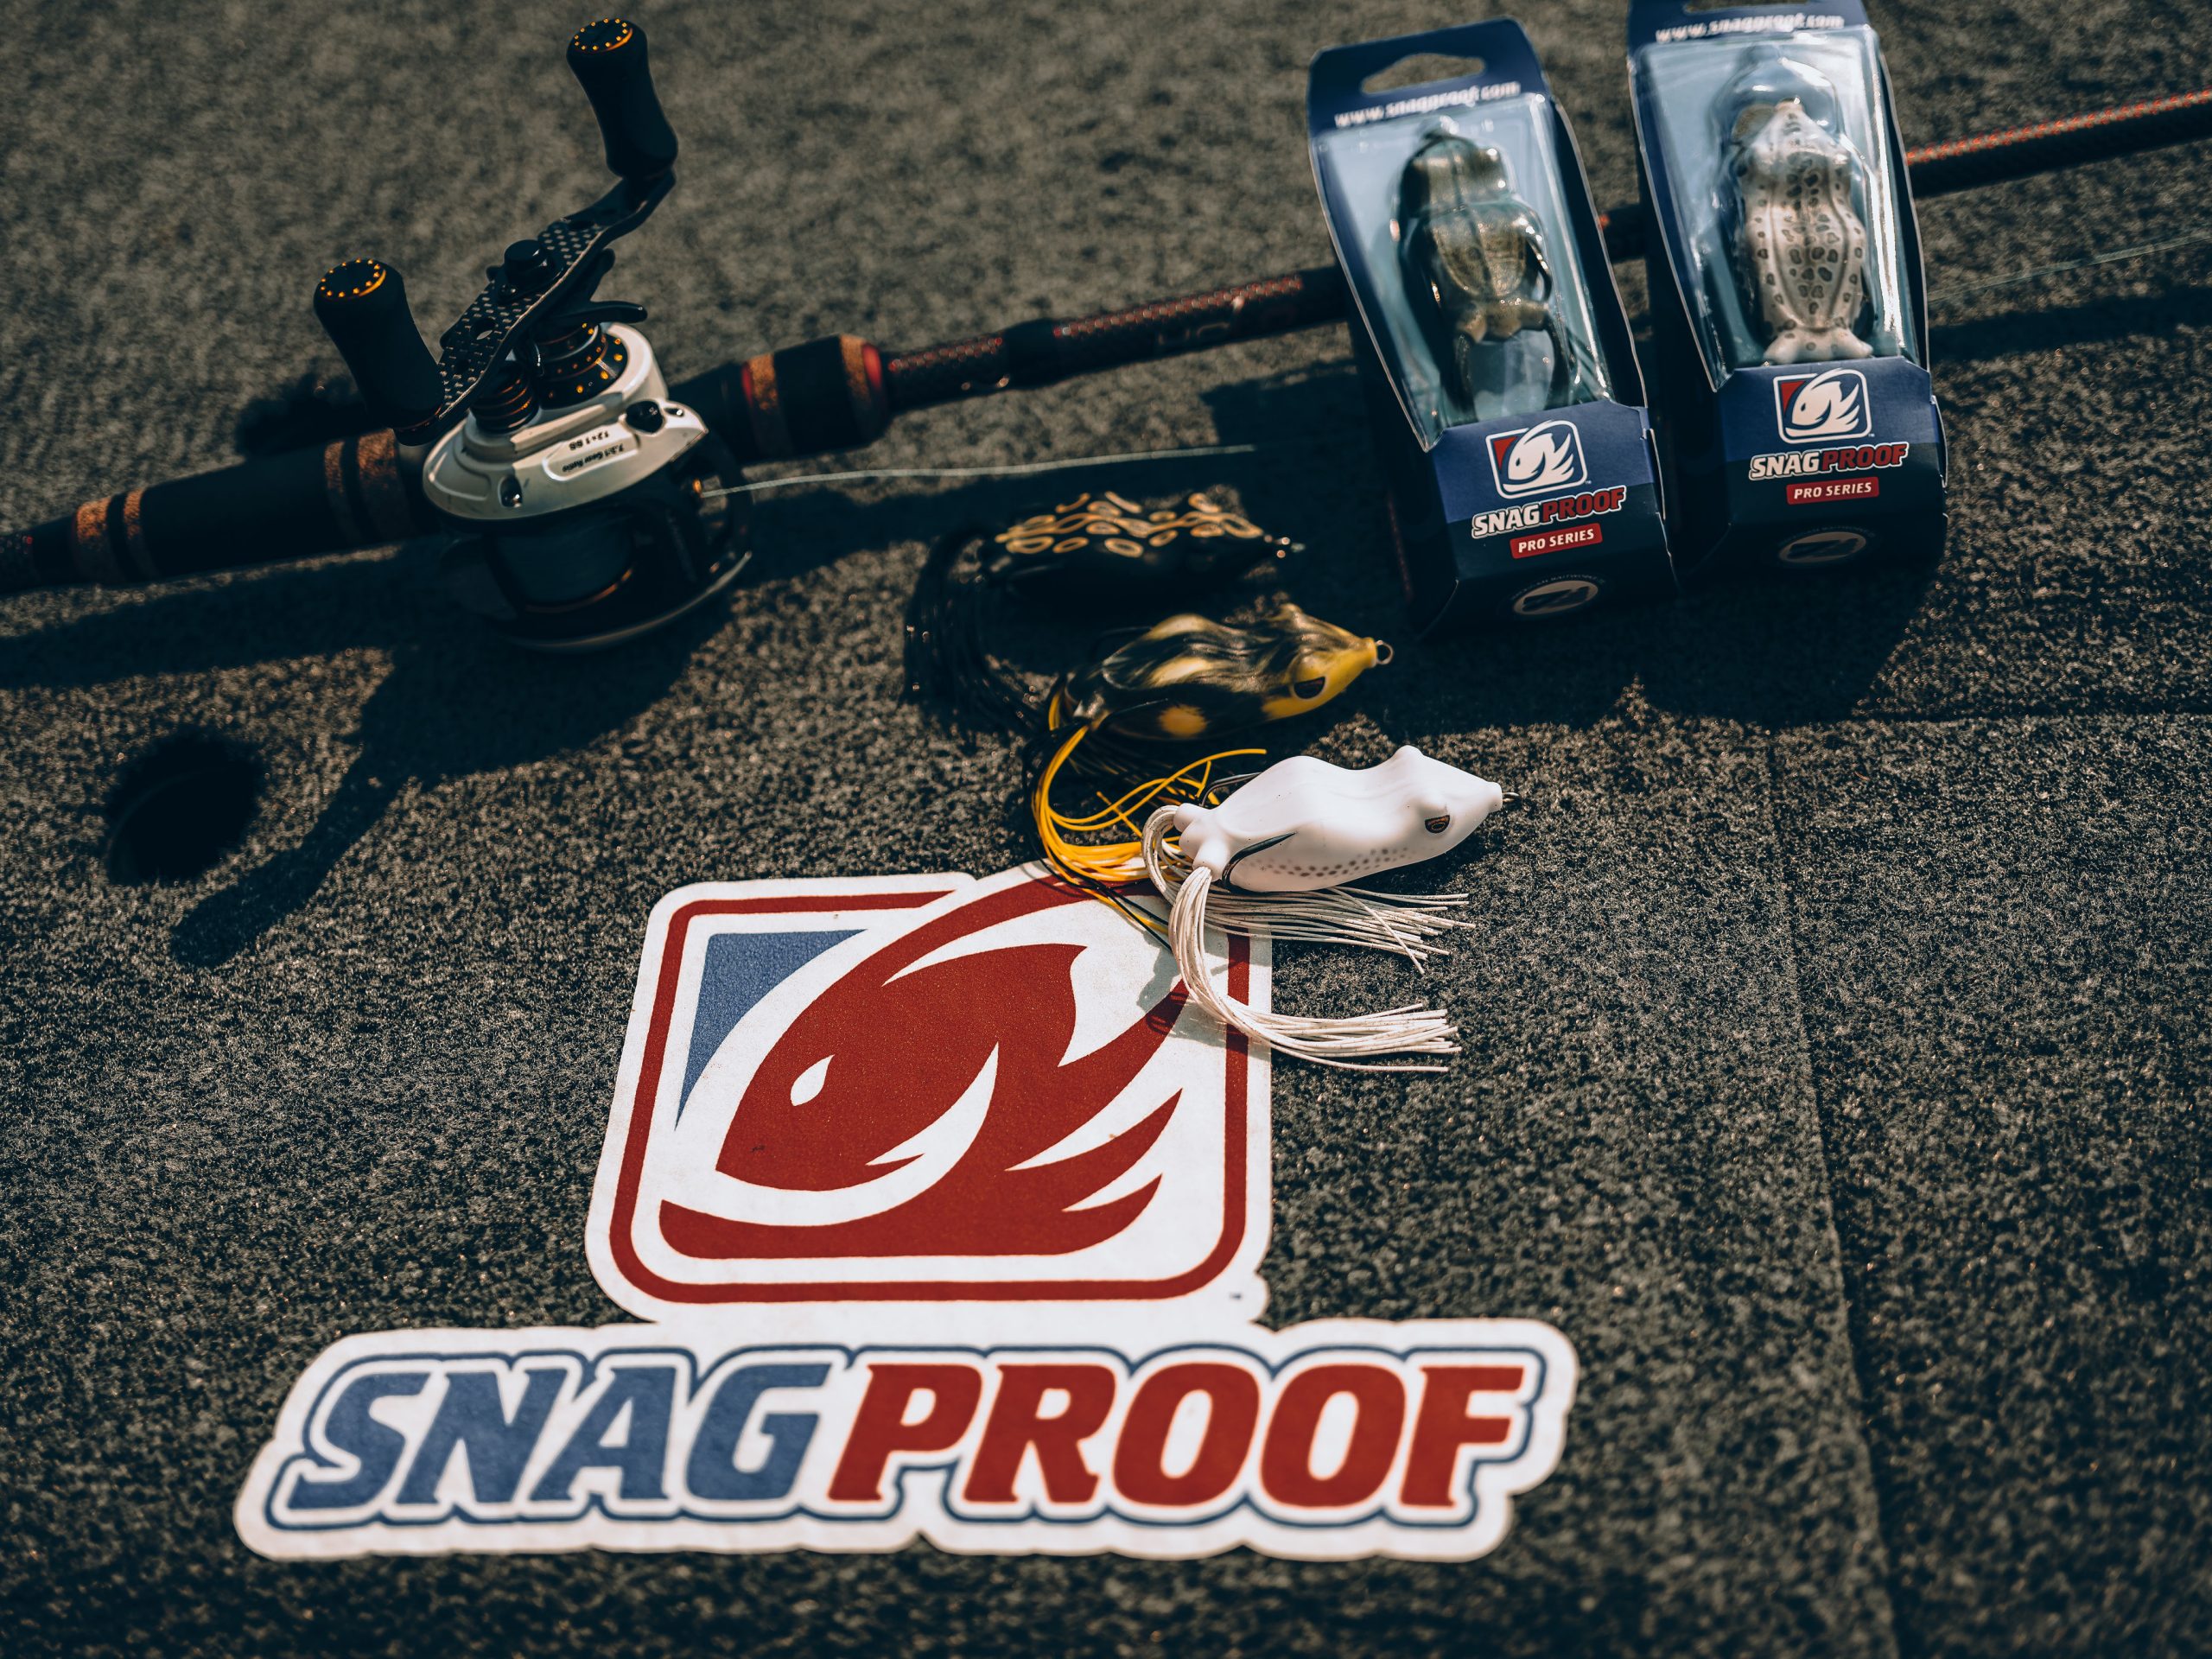 Snag Proof Returns with Reengineered Bobby's Perfect and Phat Frogs –  Anglers Channel